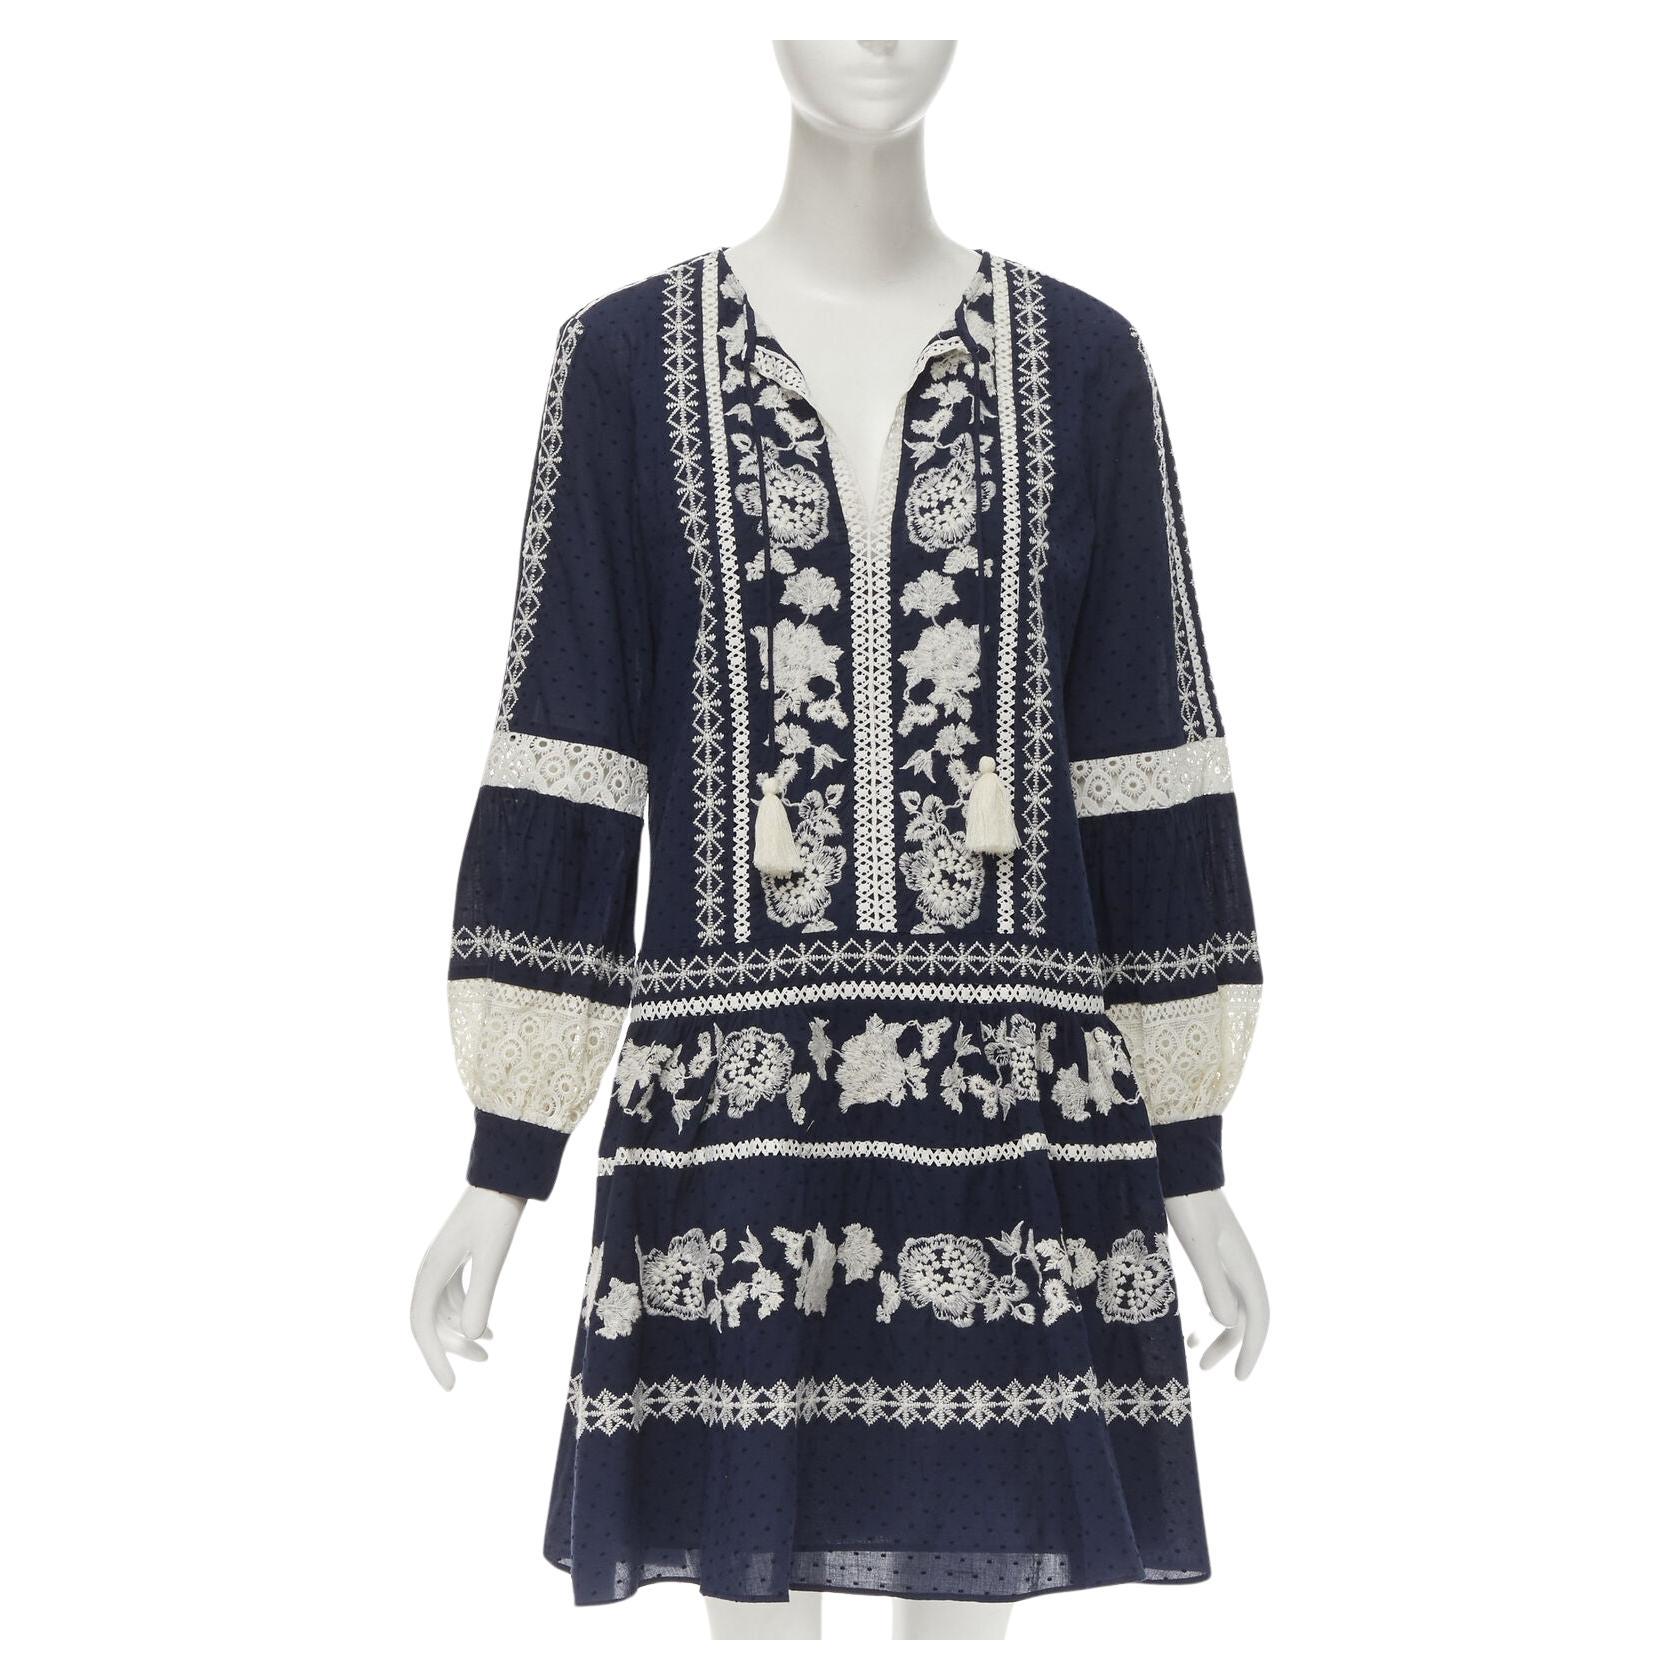 TORY BURCH navy blue white floral embroidery flared skirt boho dress S For Sale